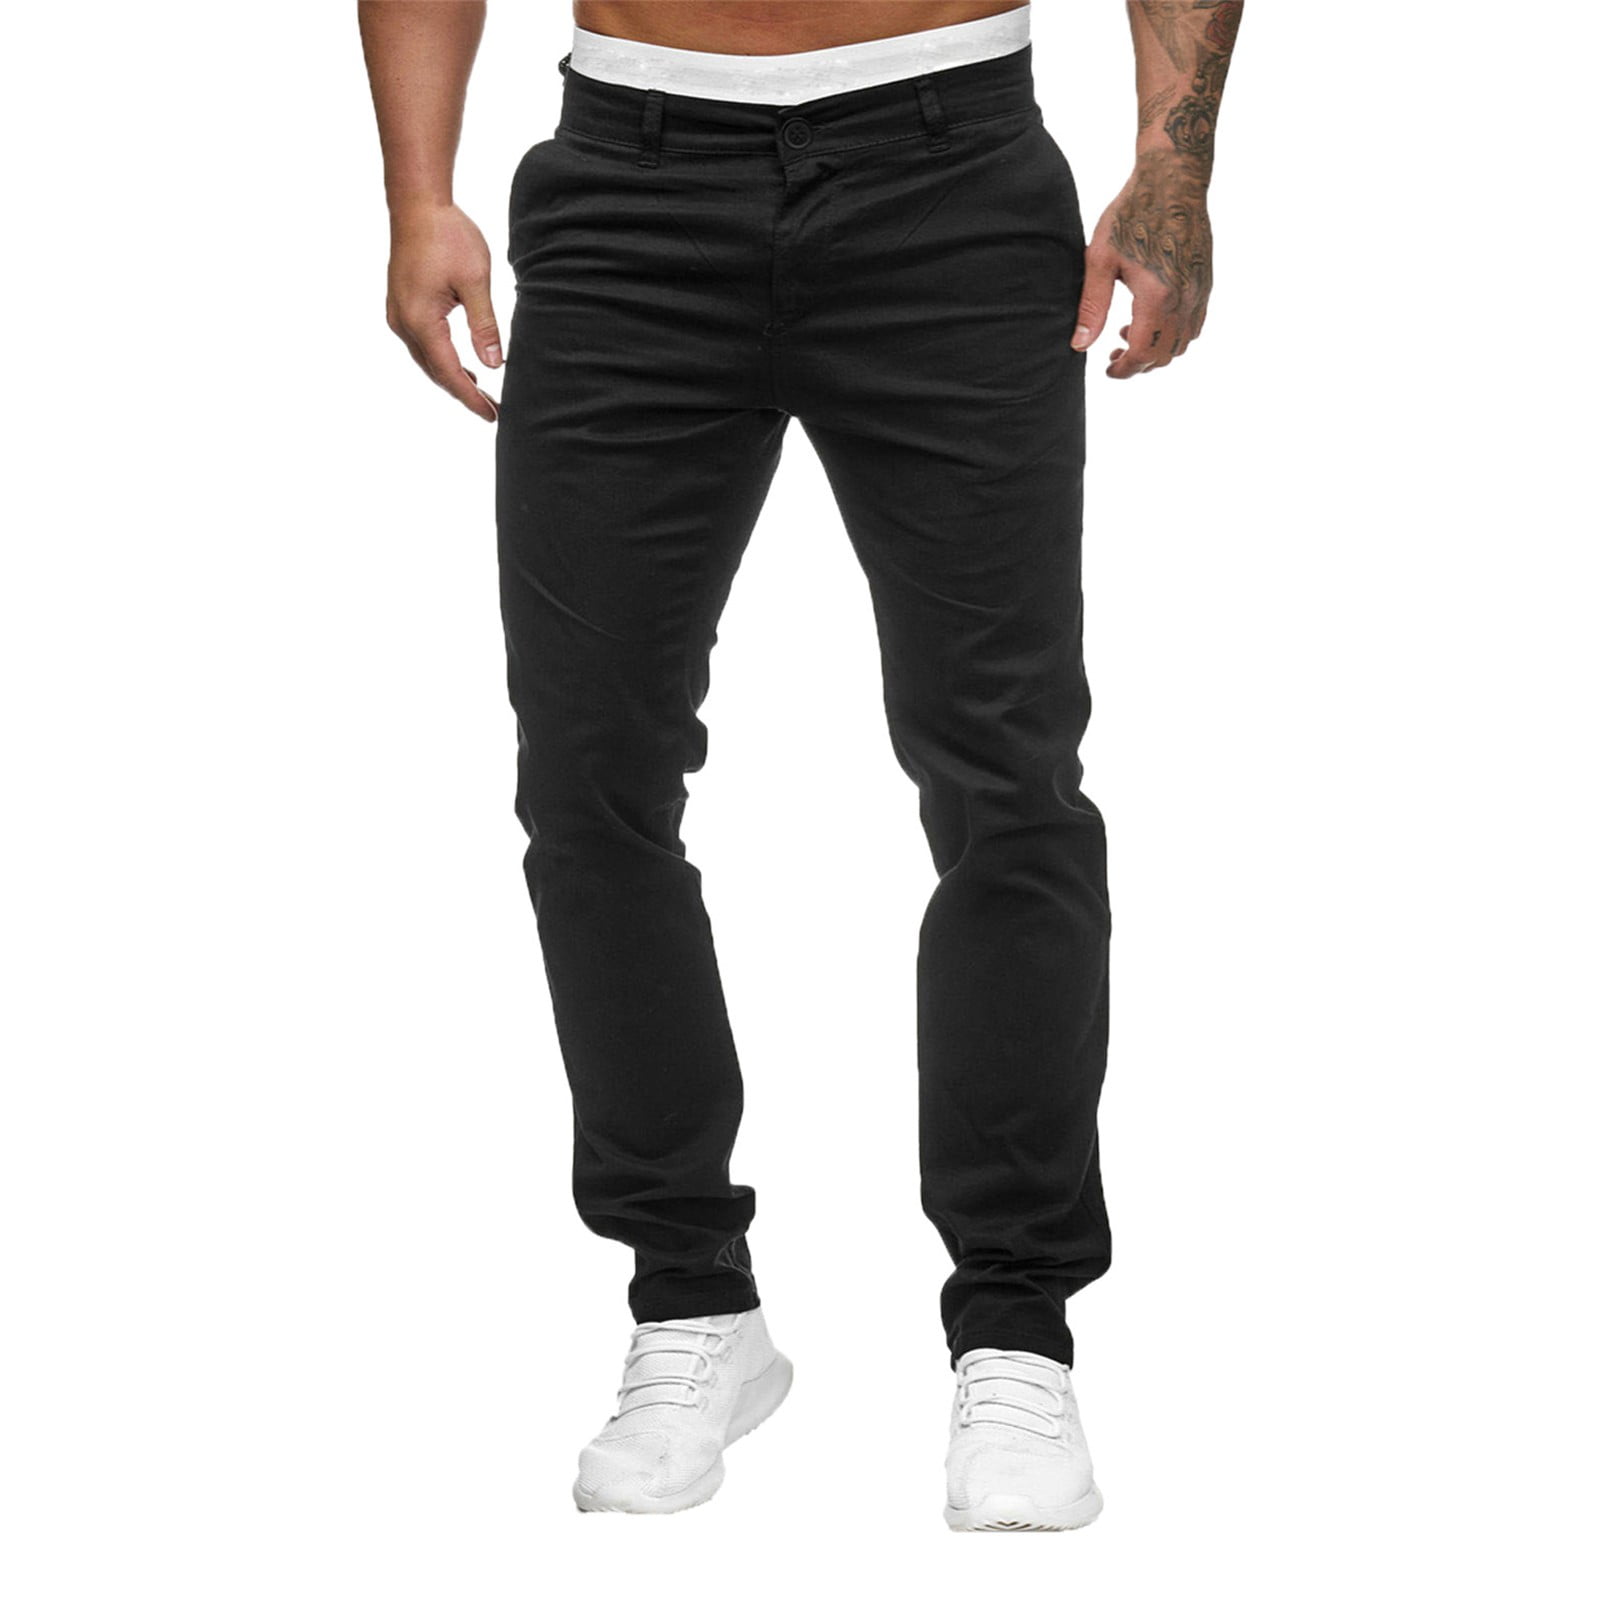 Work Pants for Men Casual Pant With Stretch Solid Black L - Walmart.com